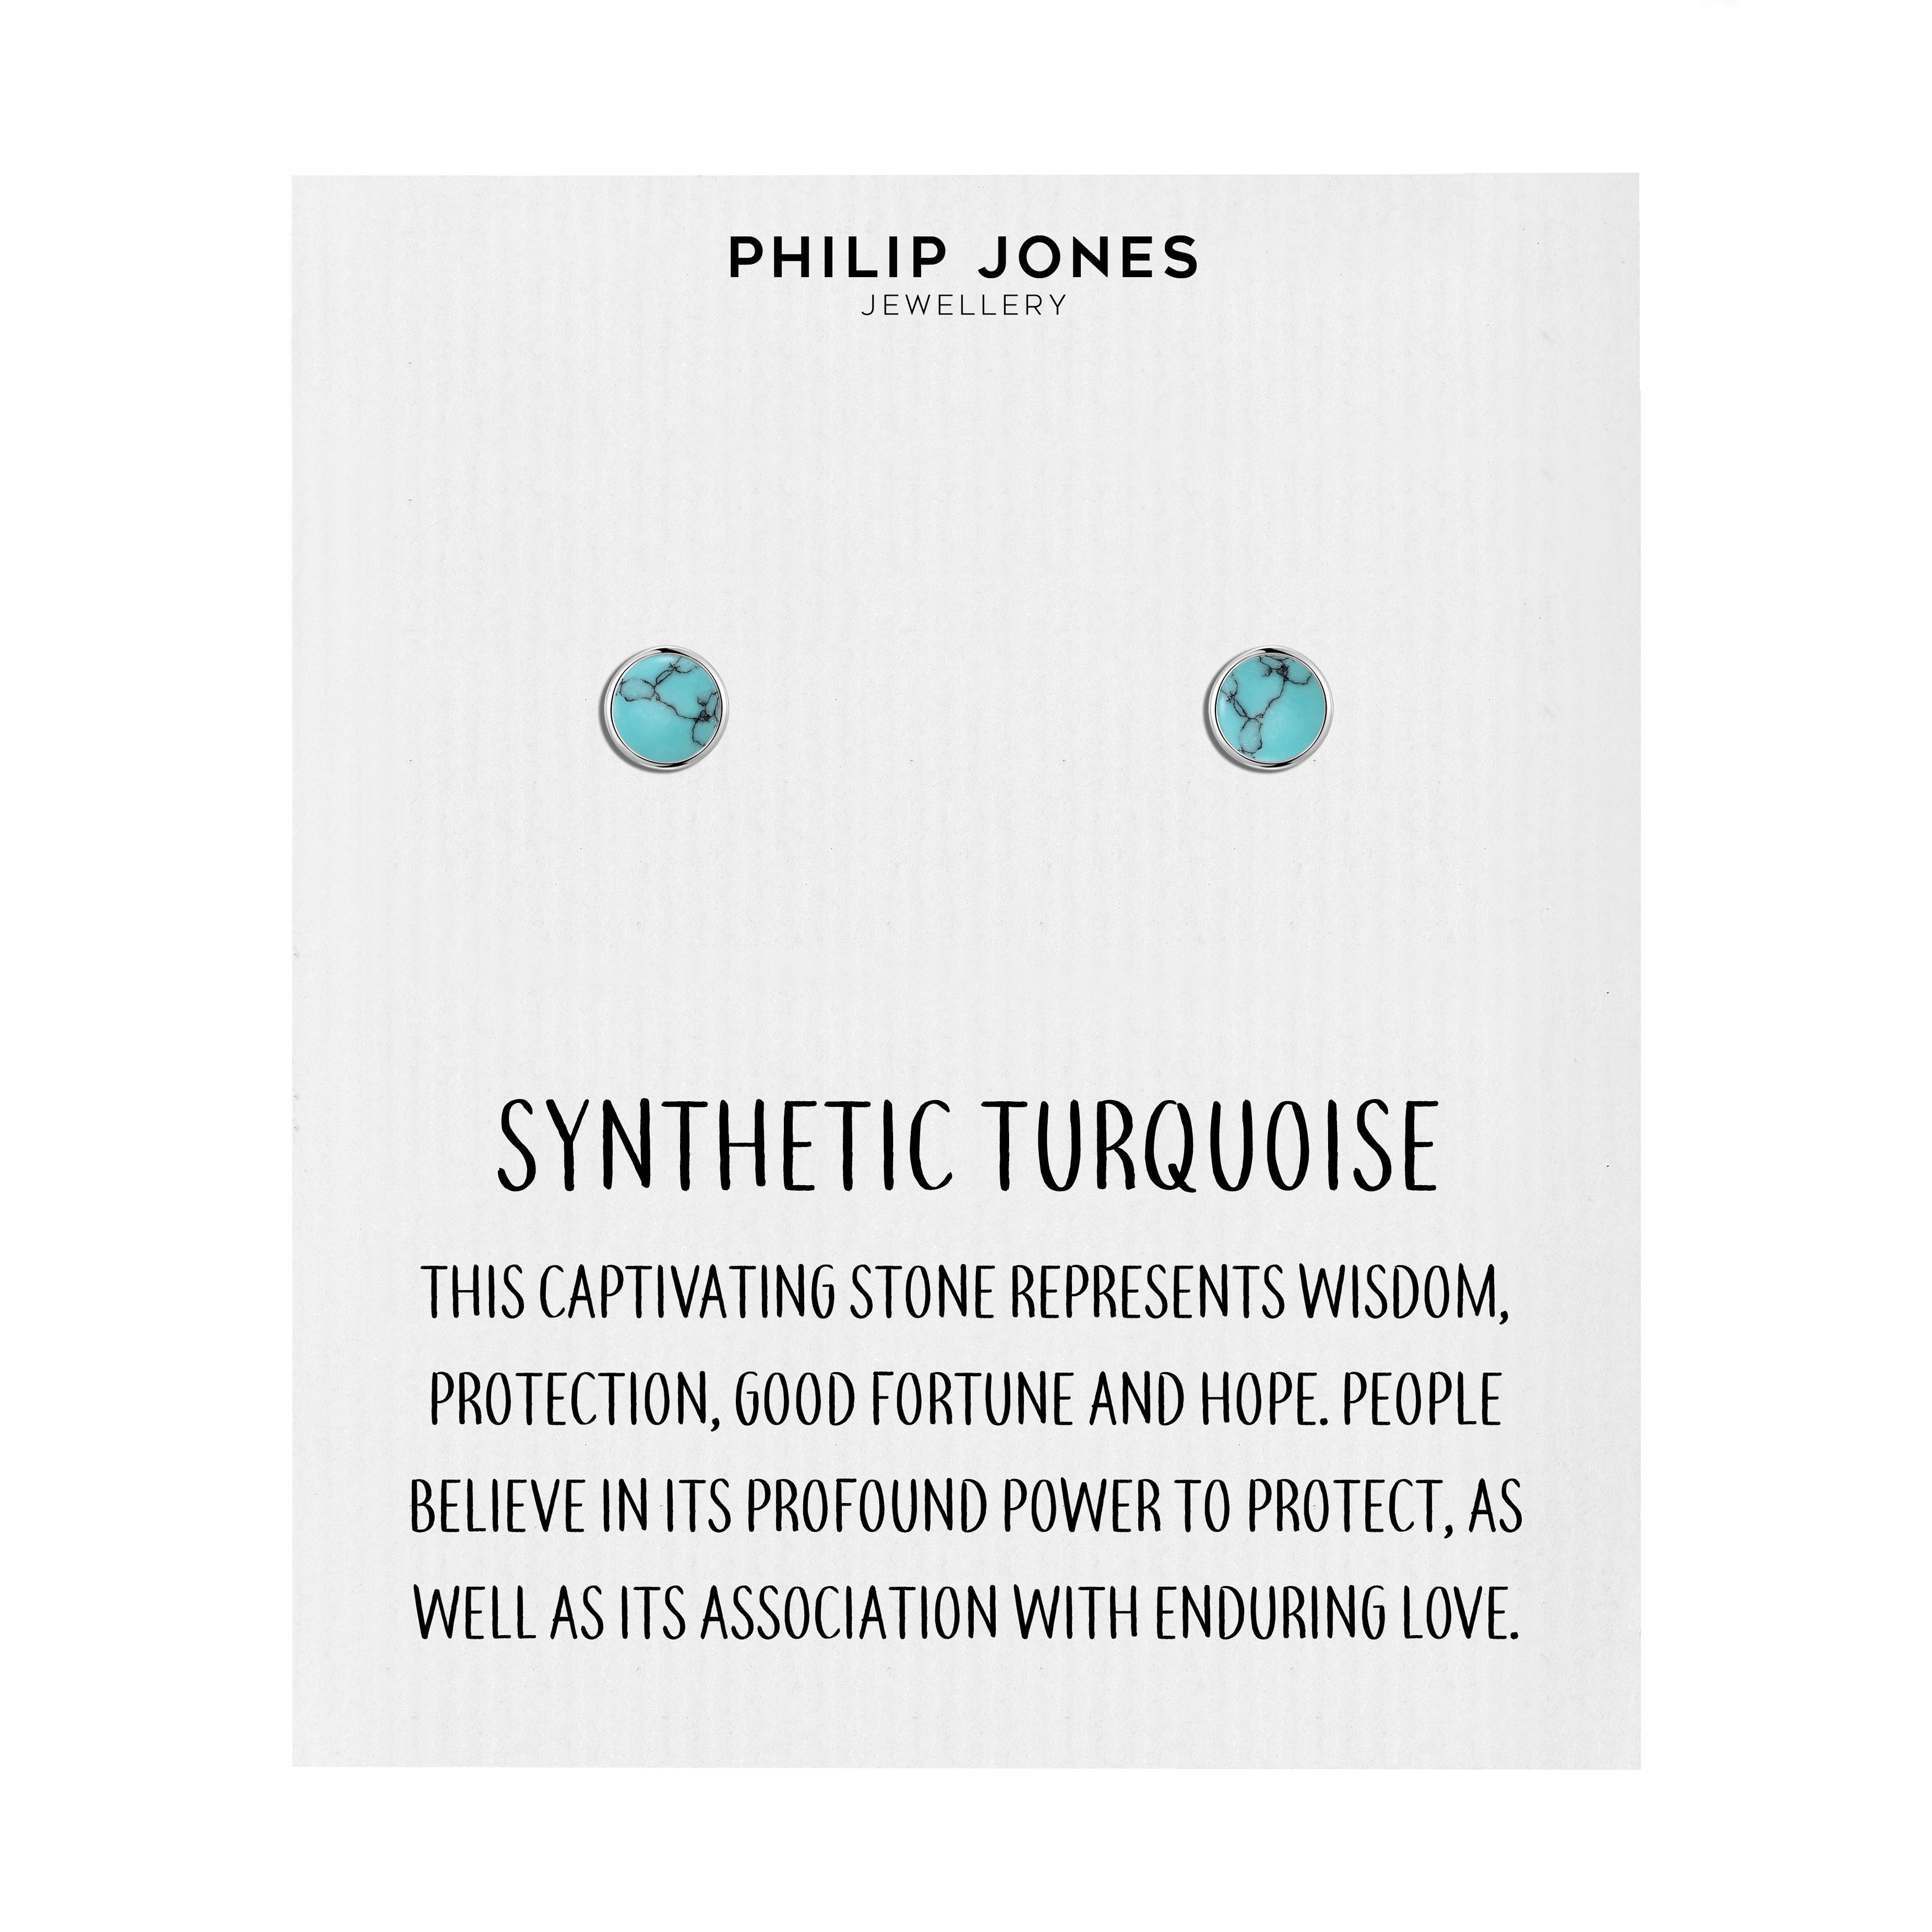 Synthetic Turquoise Stud Earrings with Quote Card by Philip Jones Jewellery